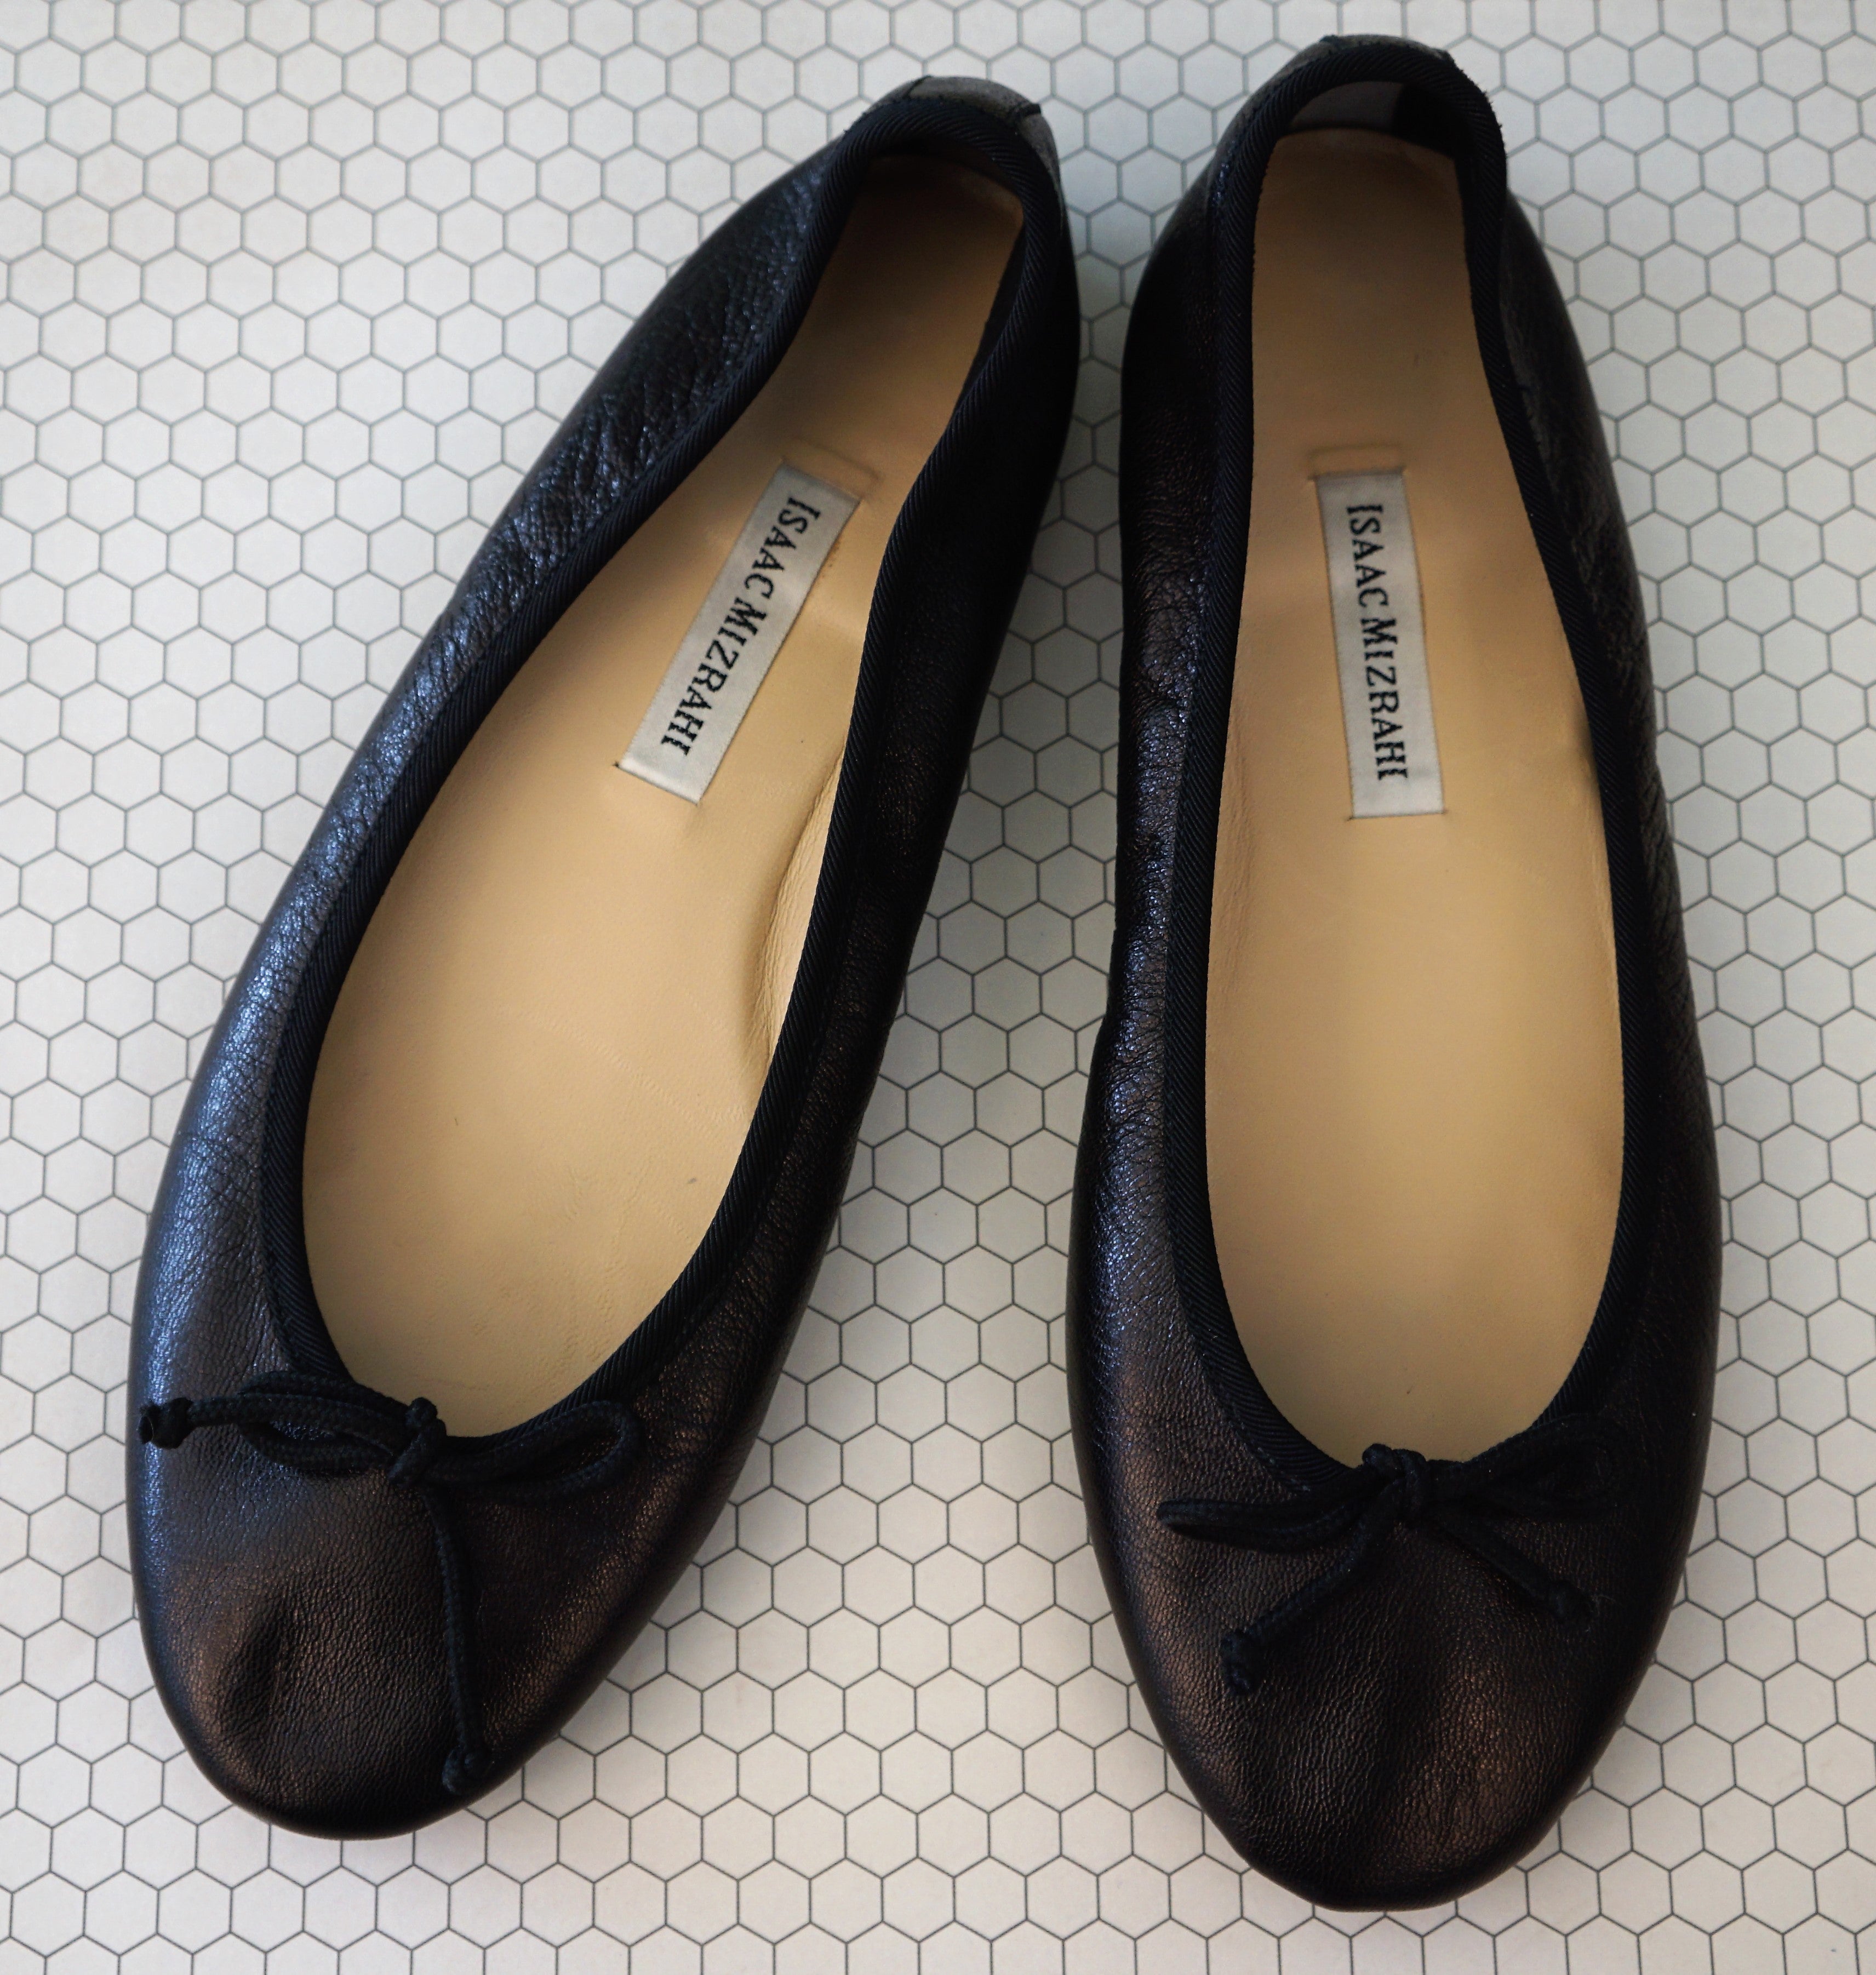 isaac mizrahi shoes made in italy